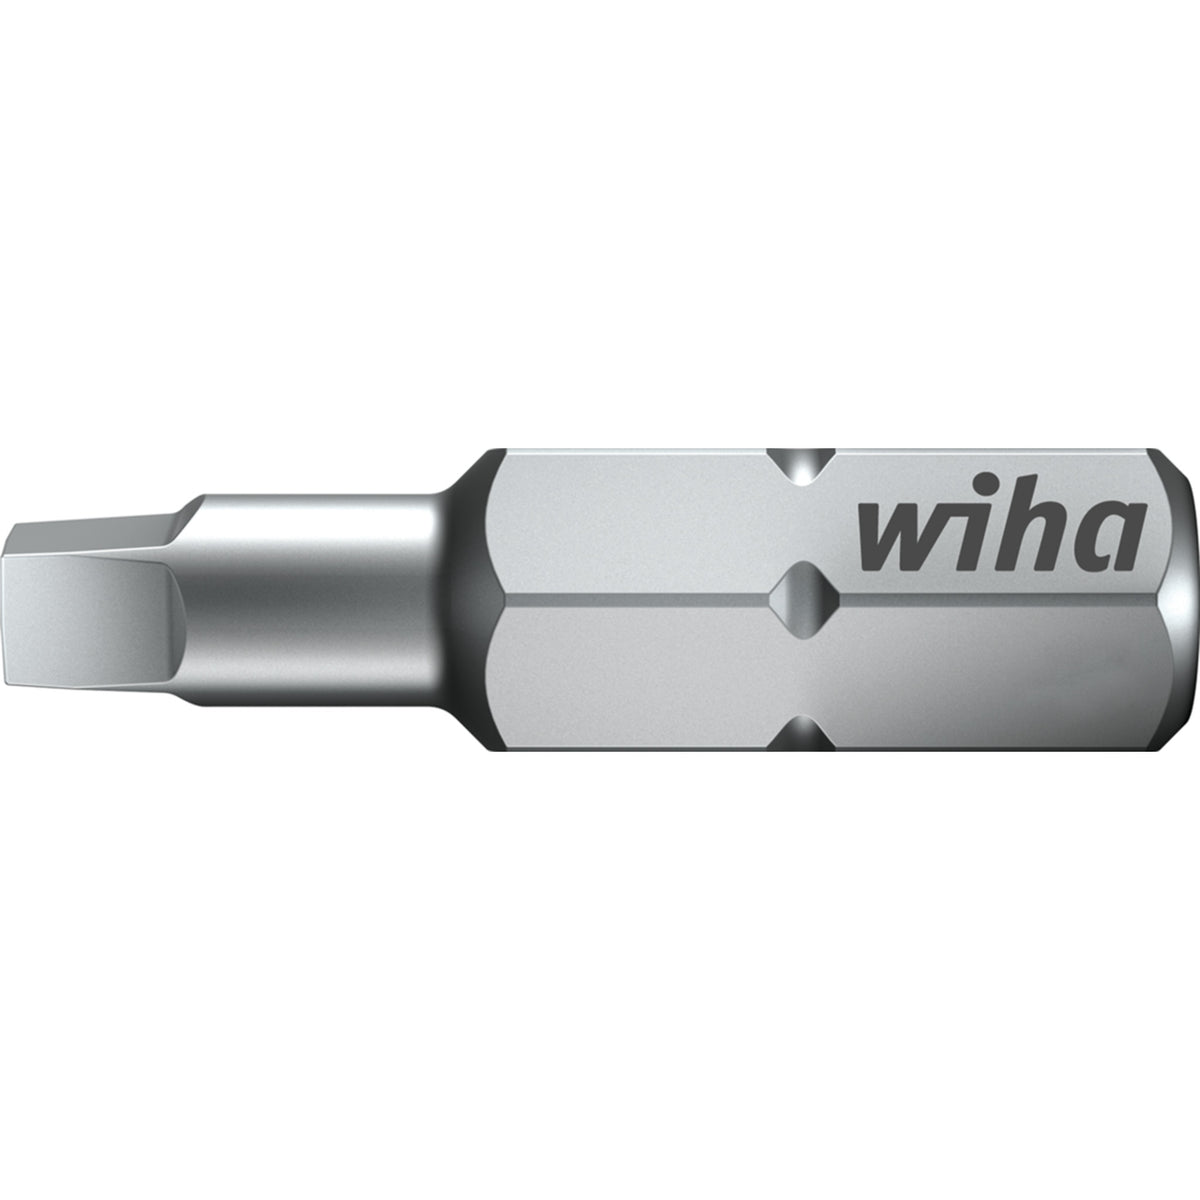 Wiha 72345 Square Contractor Bits #2 x 25mm - 250 Pack